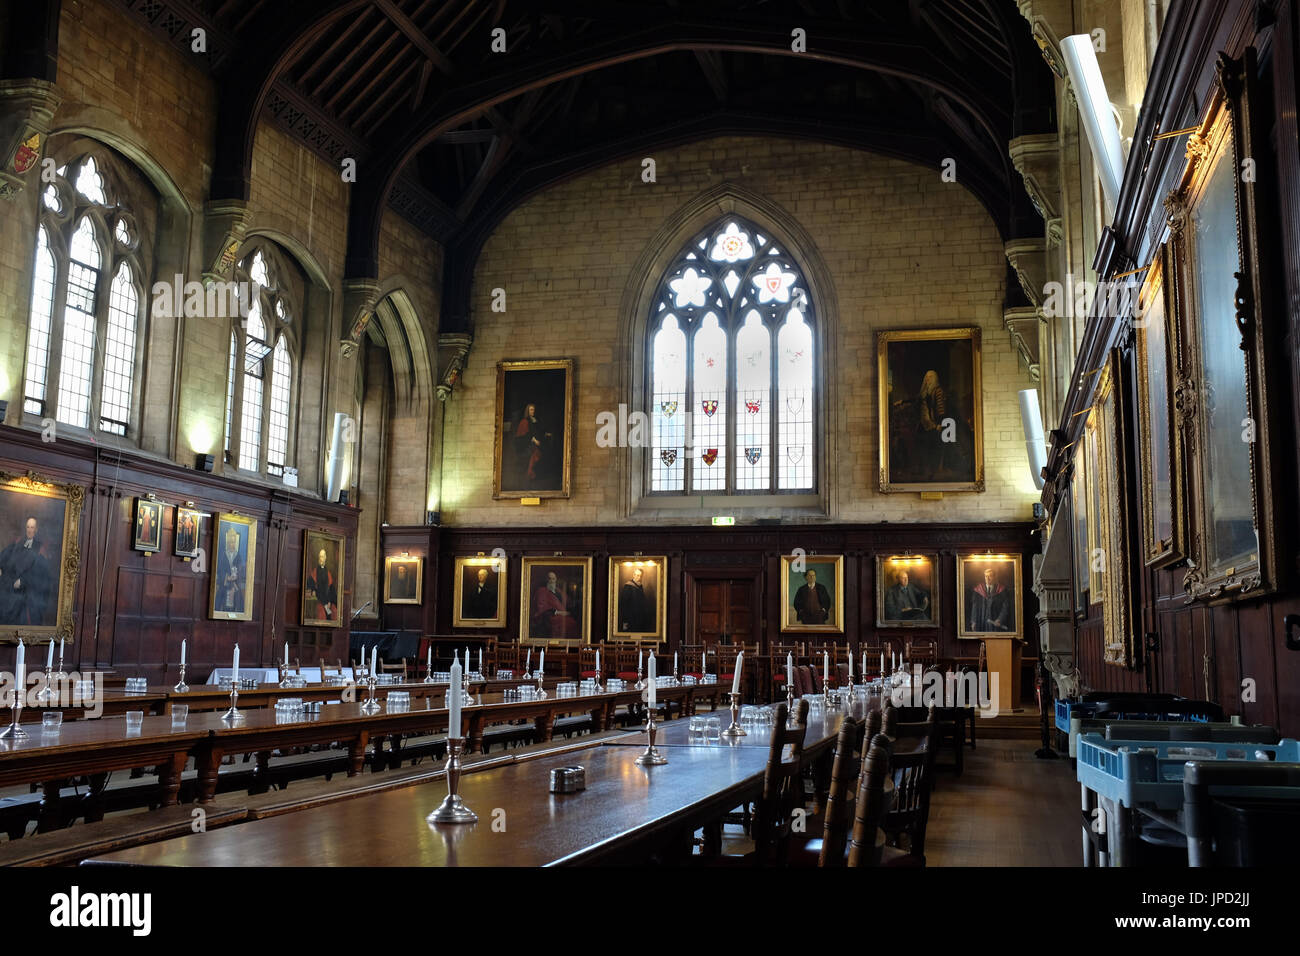 The dining hall at Balliol College in Oxford, England. Stock Photo